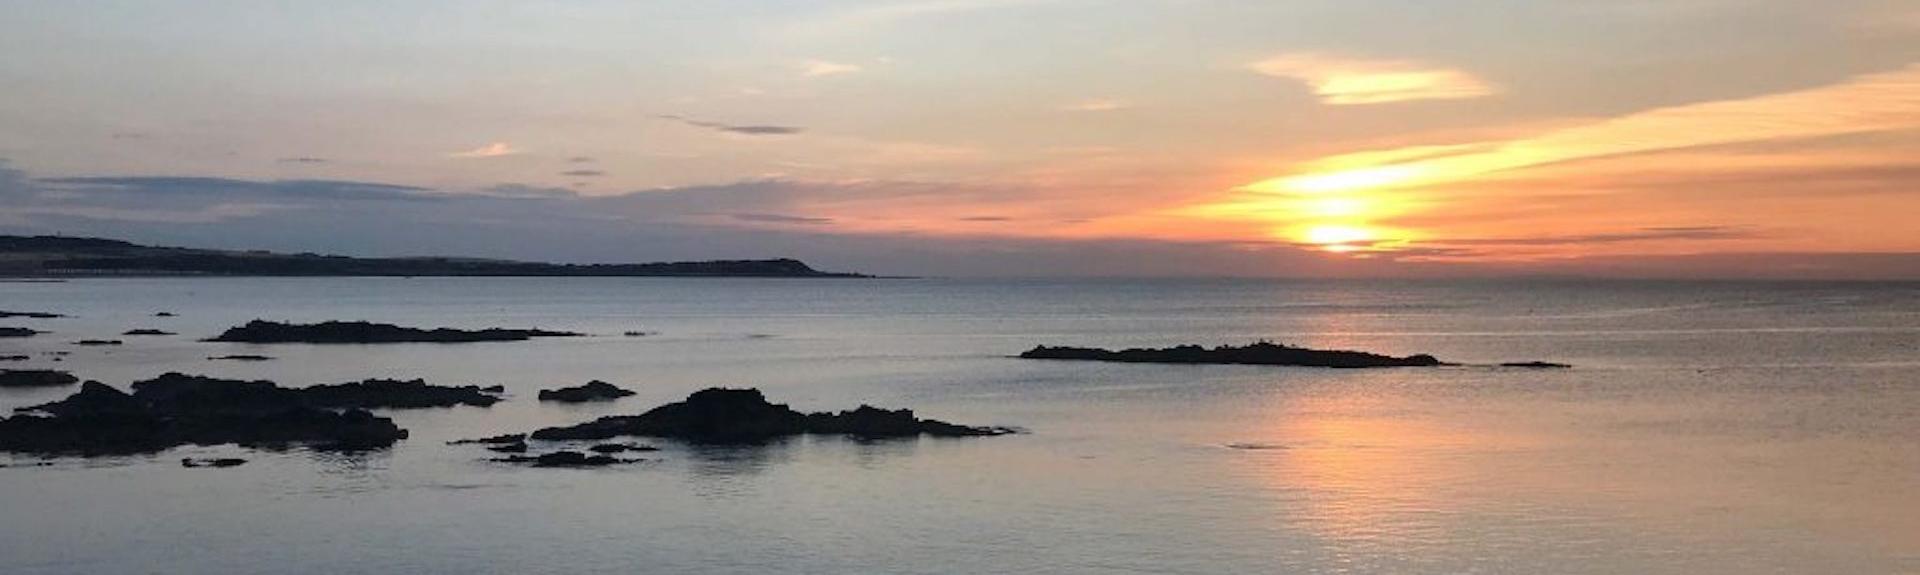 Tiny Islands on the calm Moray Firth are silhouetted against a golden sunset.